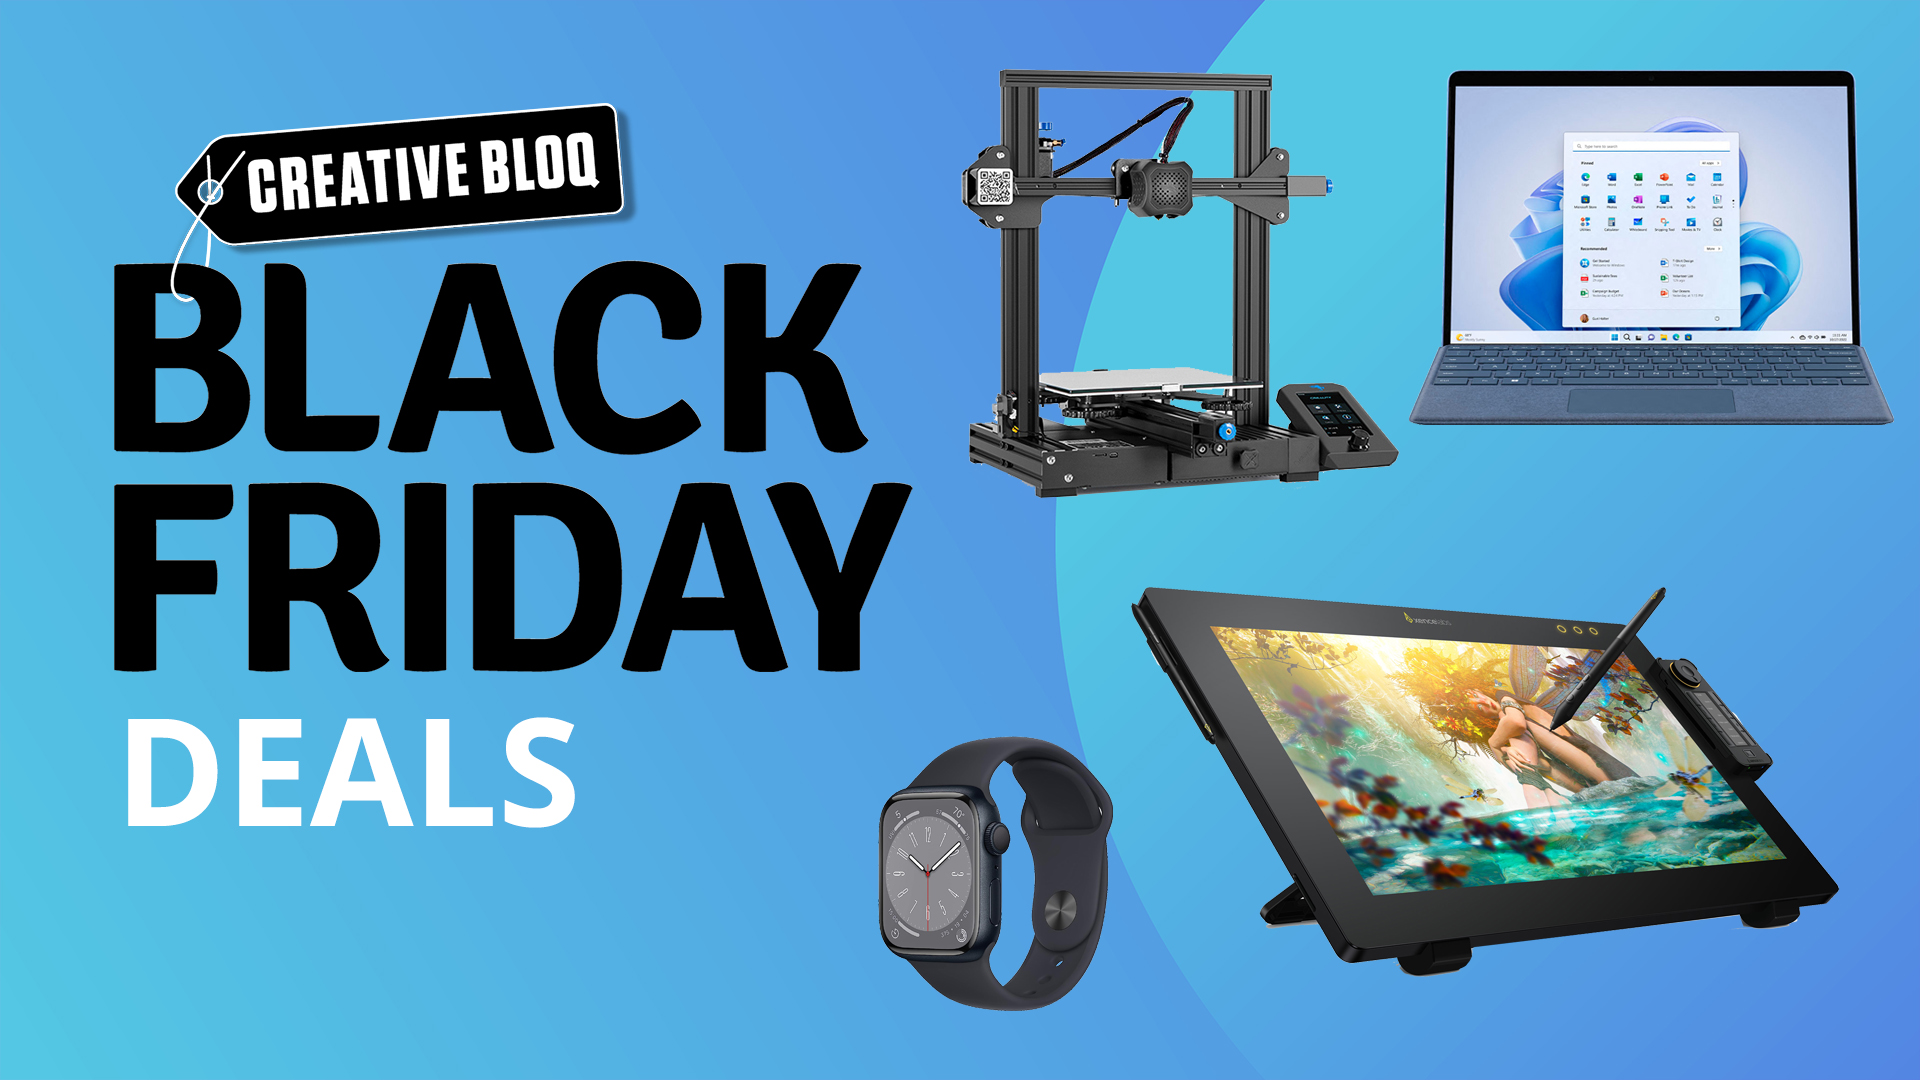 Cricut Black Friday Deals: Save On DIY Craft Machines and More